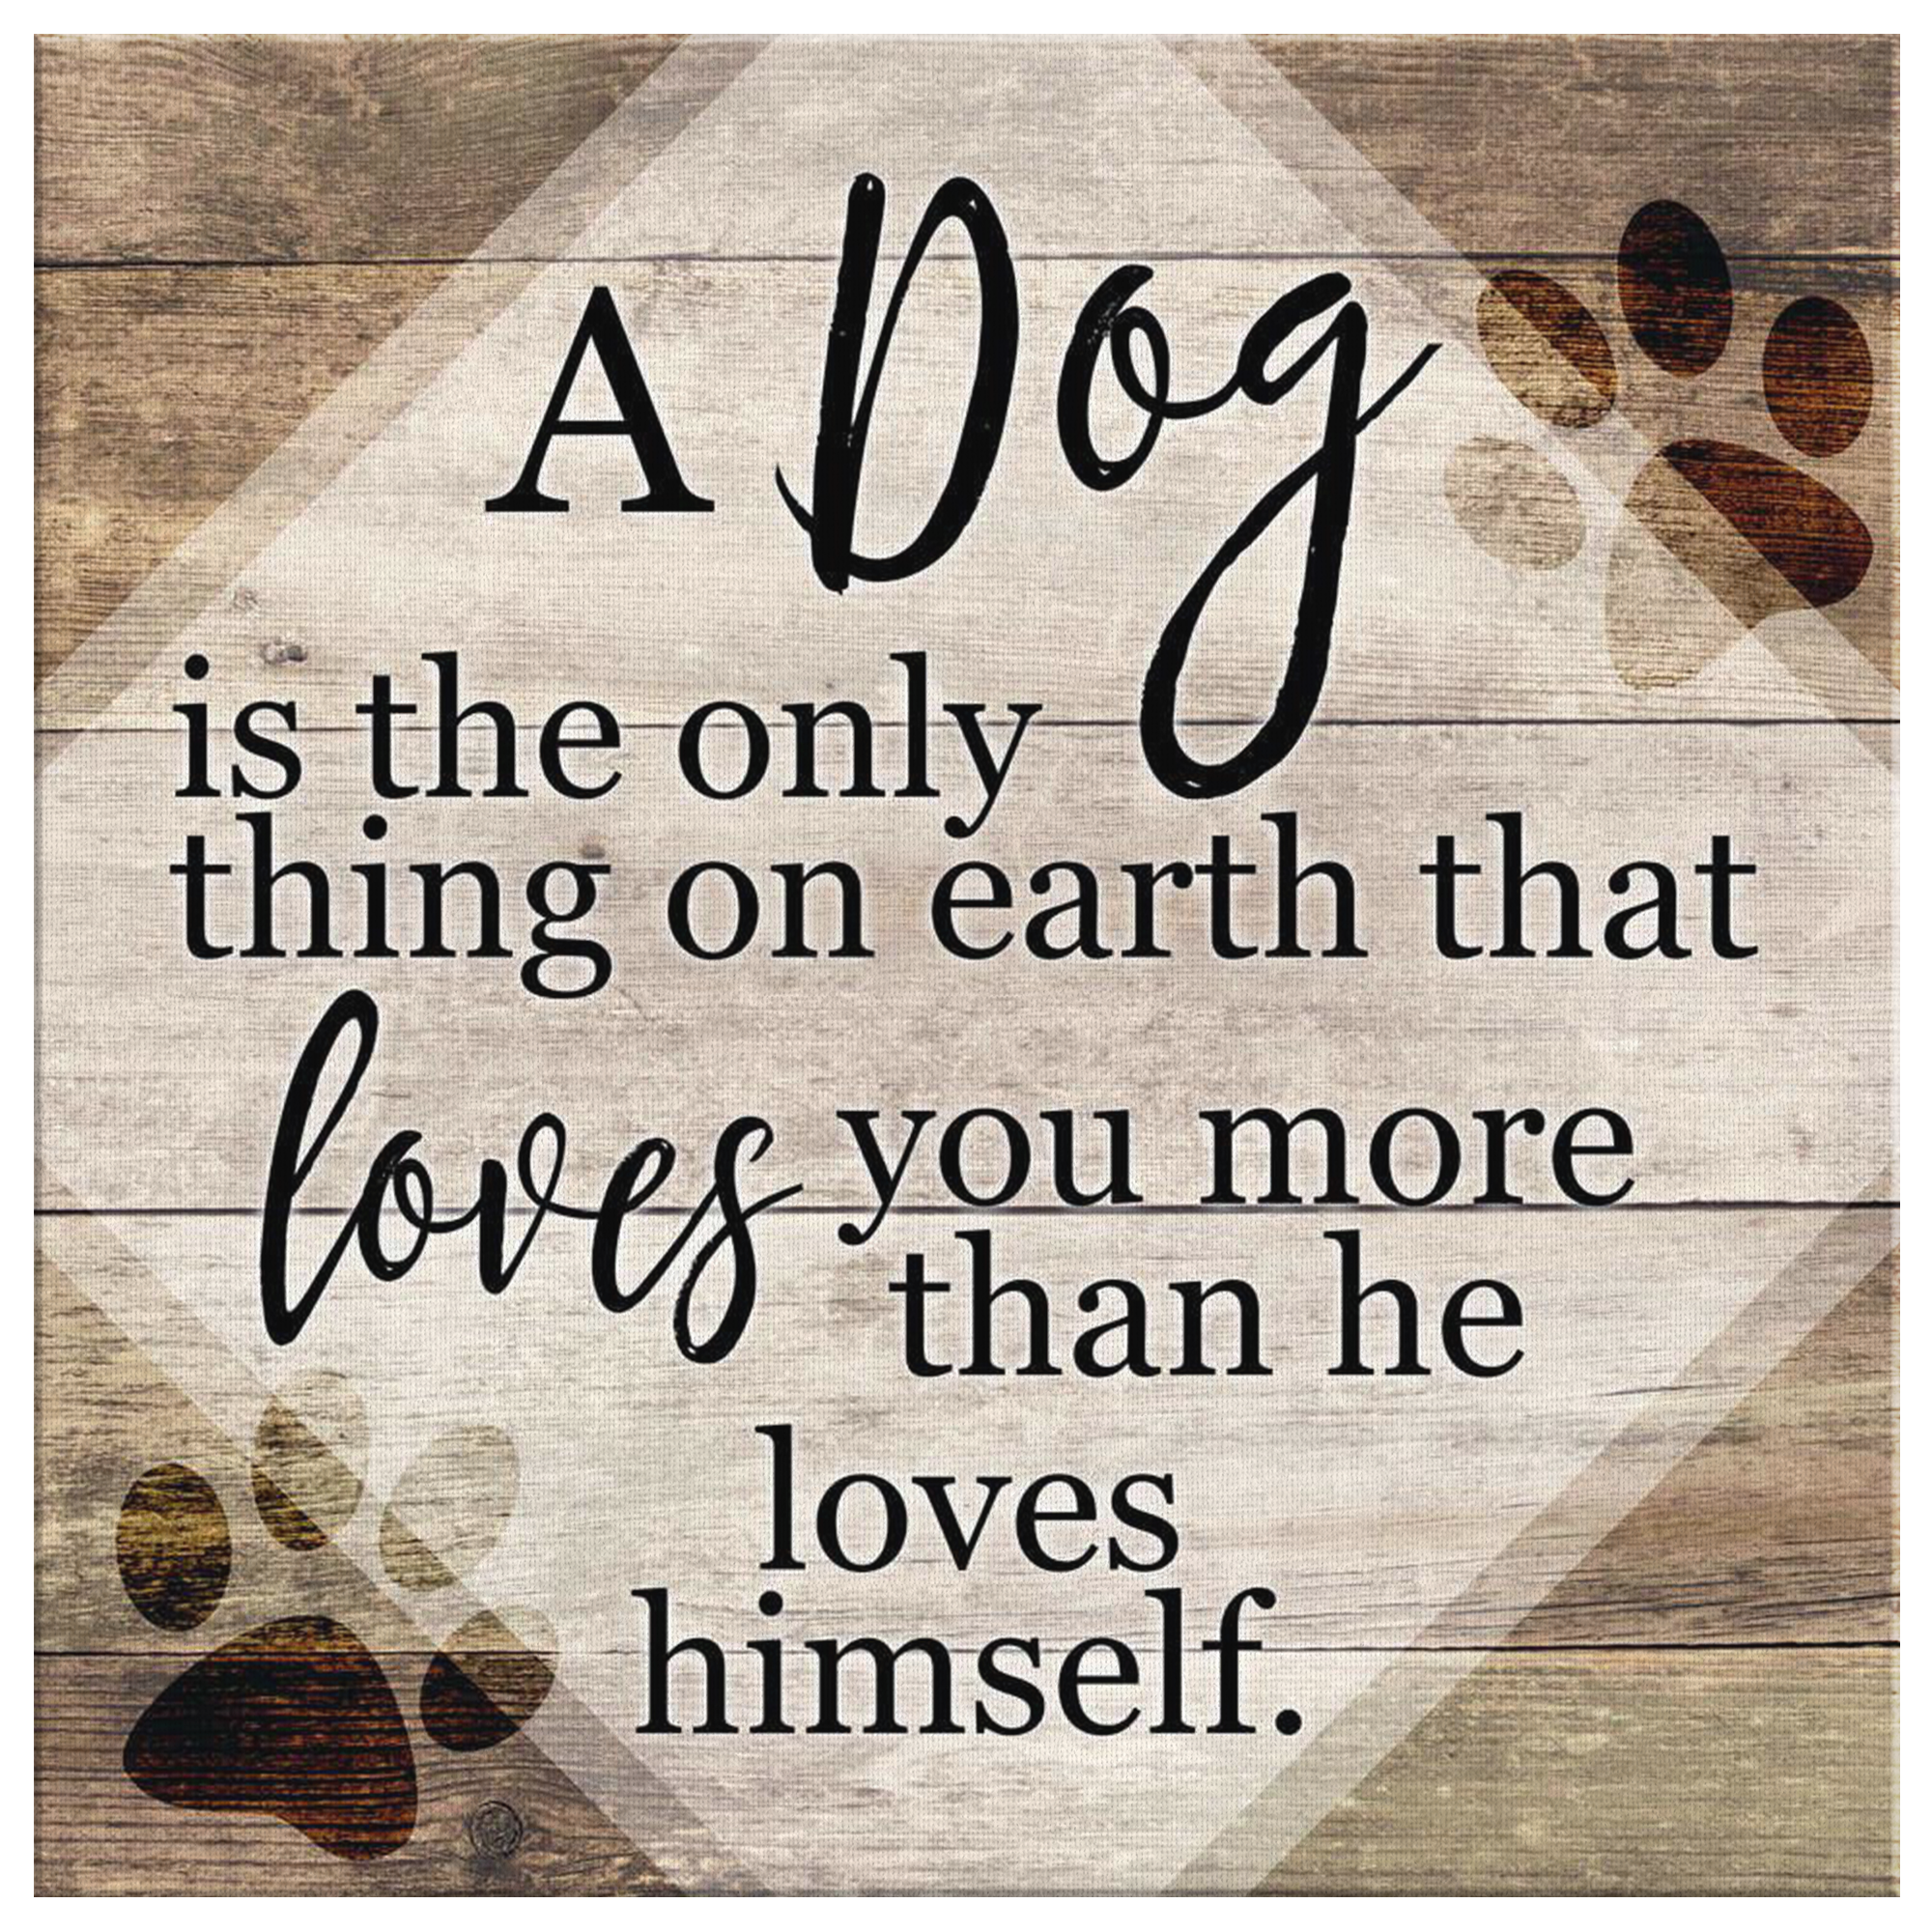 "A Dog... Loves You More Than He Loves Himself" Canvas Wall Art